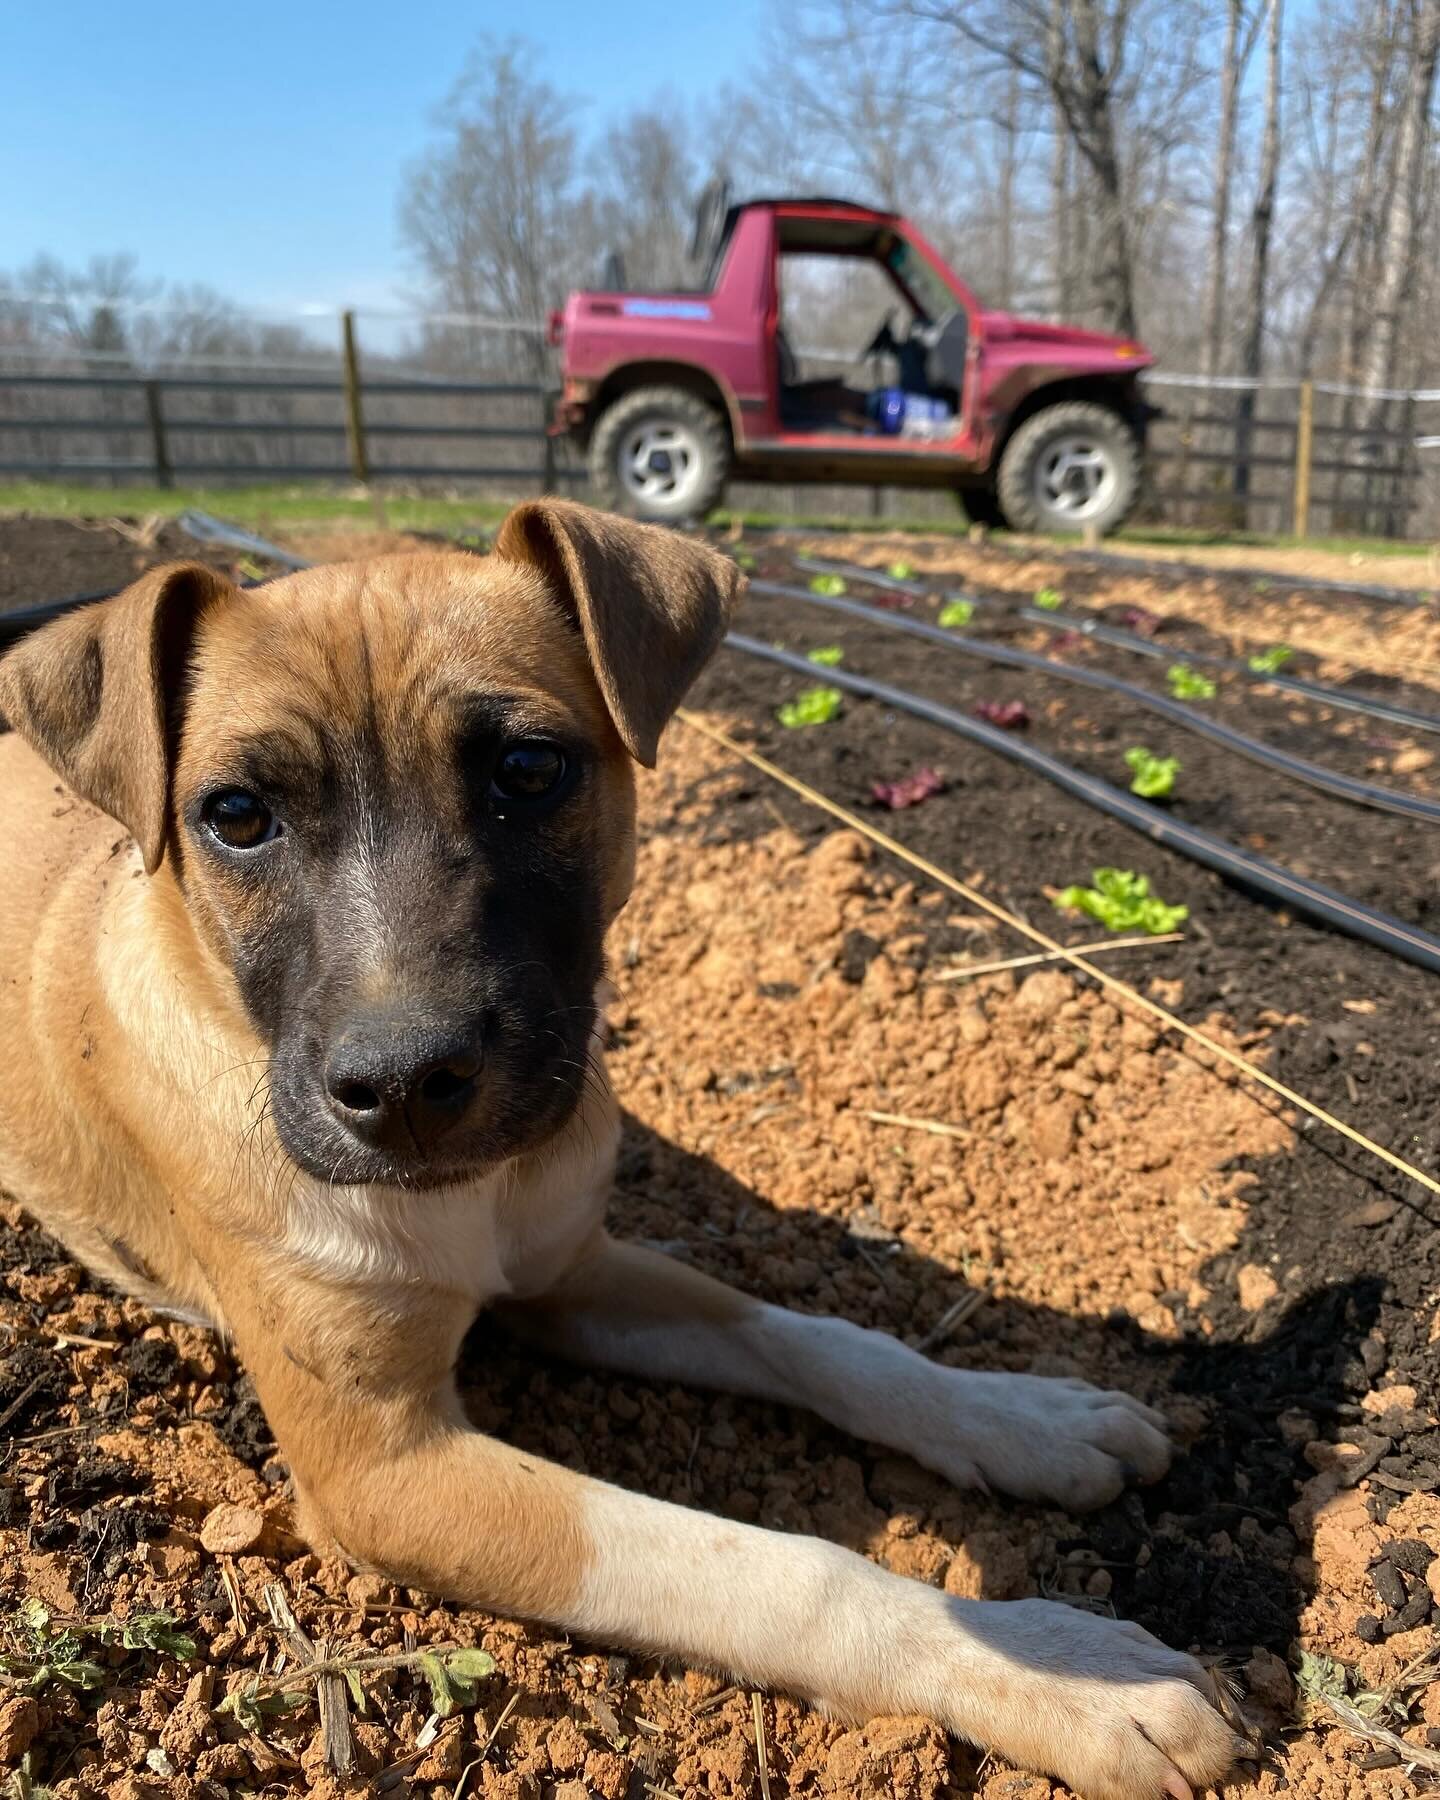 New pup, Boogie (man), &ldquo;helping&rdquo; me plant lettuce today! He&rsquo;s pretty good for a baby dog (knock on wood). Excited for this lettuce. New to me variety called &ldquo;Lollo&rdquo;